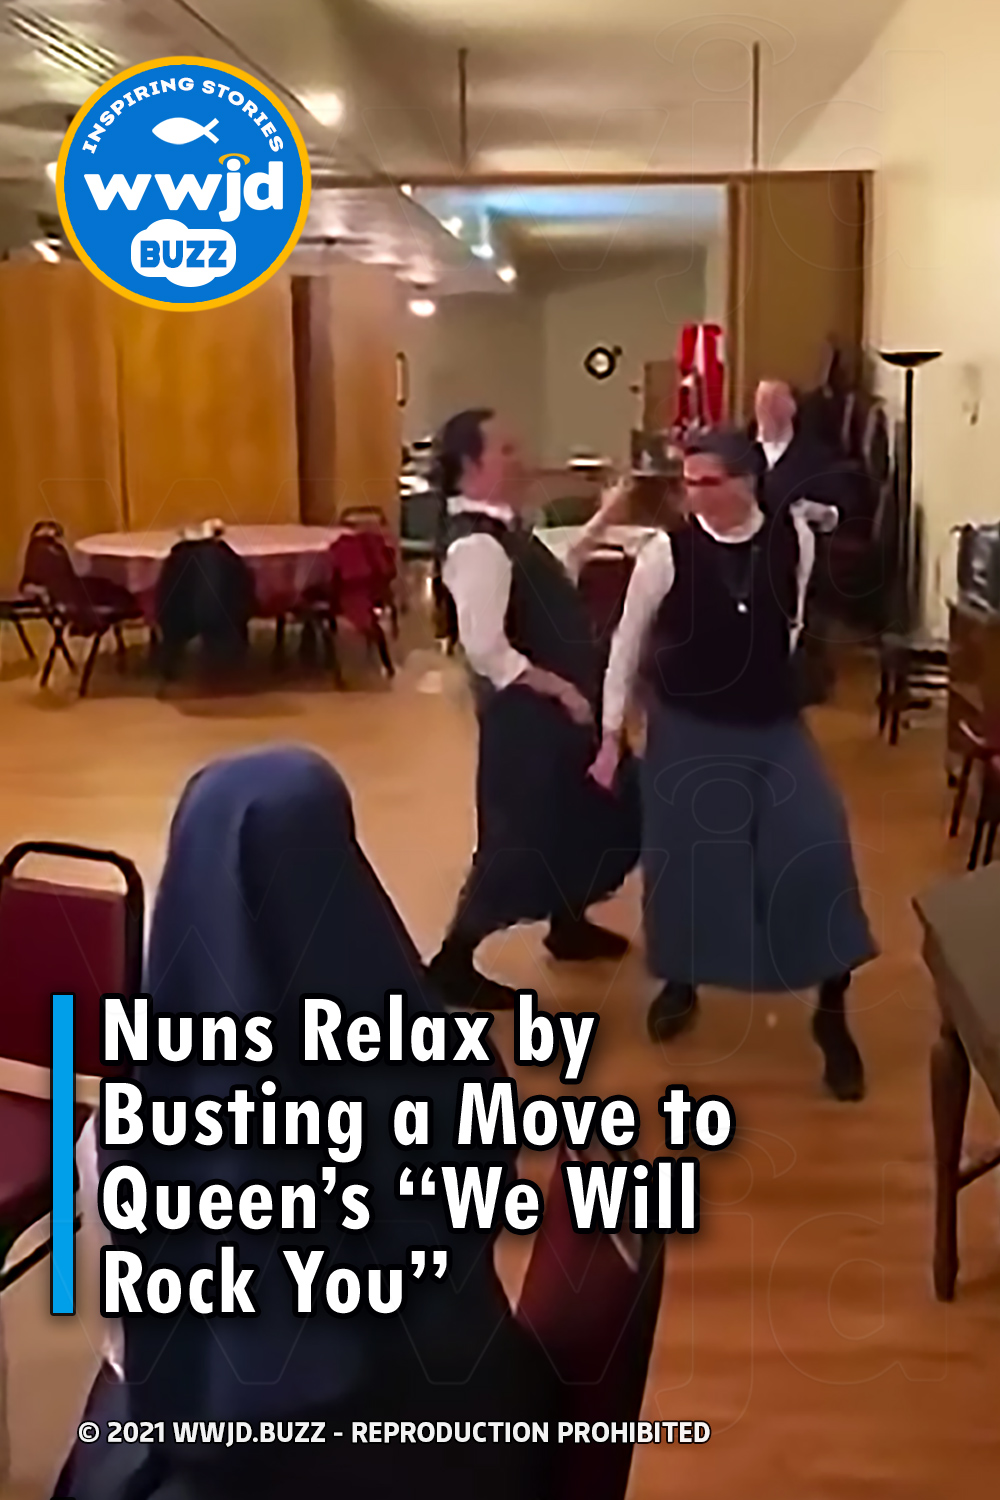 Nuns Relax by Busting a Move to Queen’s “We Will Rock You”